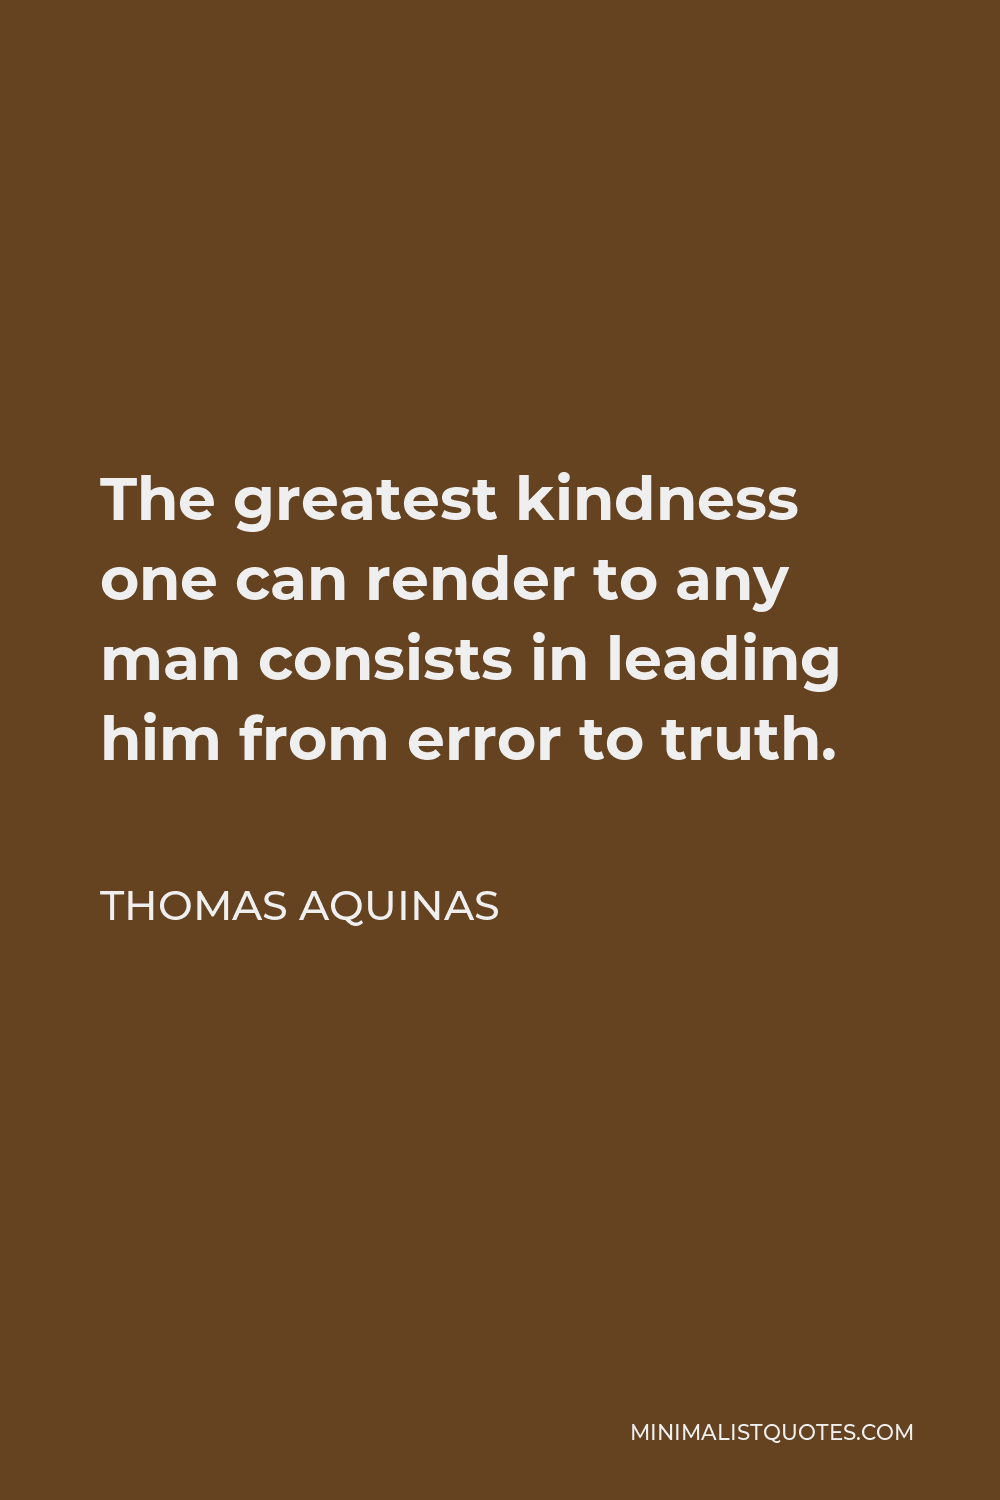 Saint Augustine Quote - The greatest kindness one can render to any man is leading him to truth.